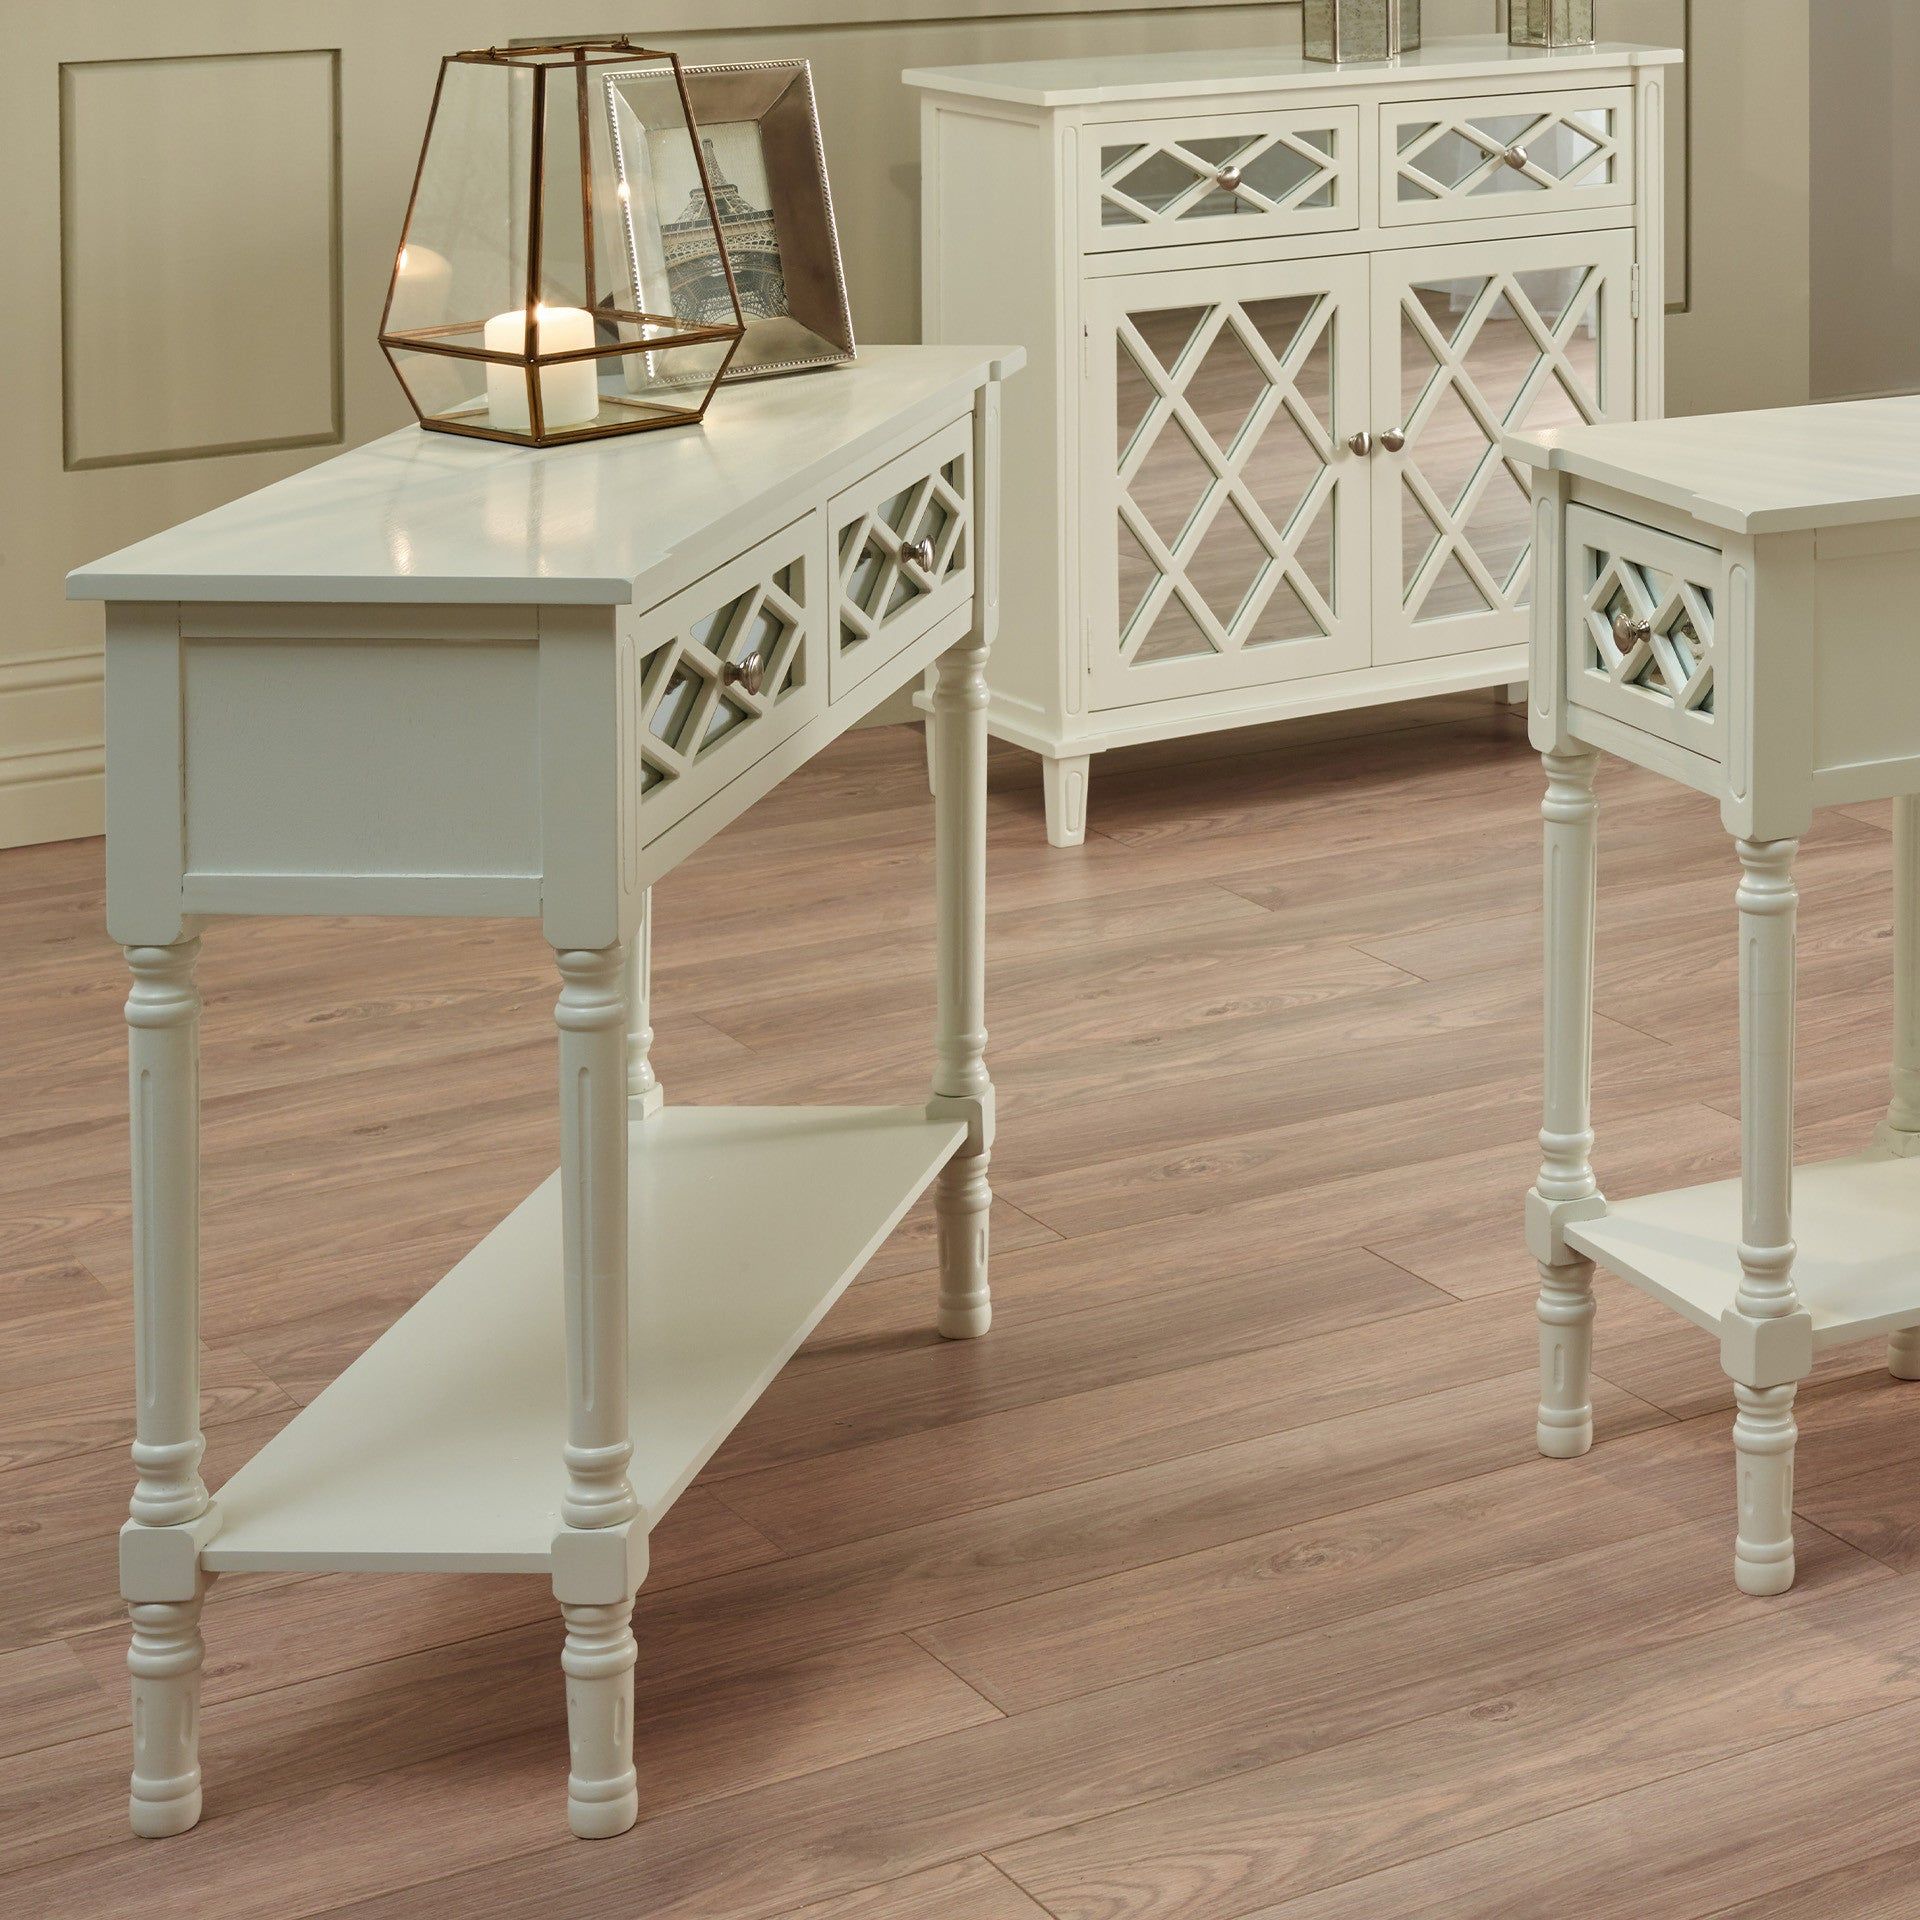 Puglia Mirrored Pine Wood Console Table K/D- Ivory Finish